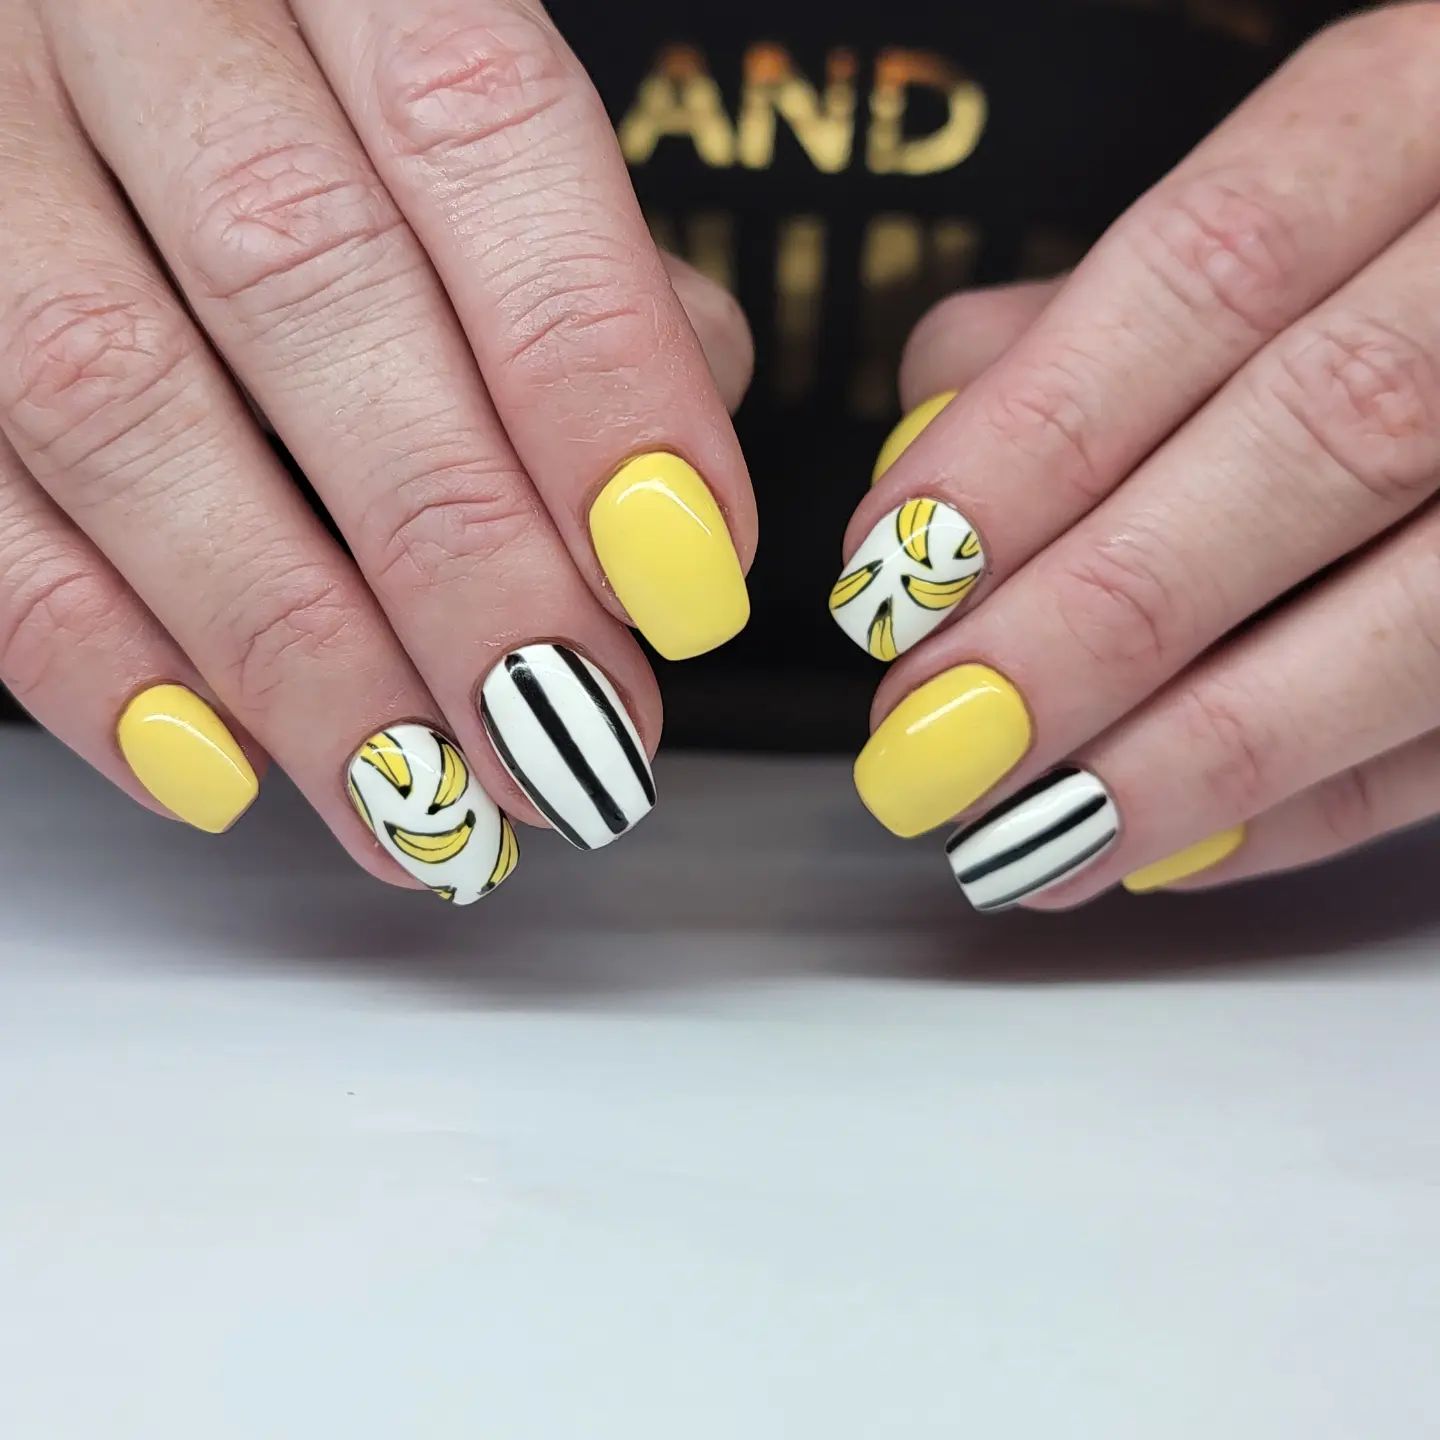  There are many banana inspired things and objects outside, so why not showing this iconic fruit as your accent nails?